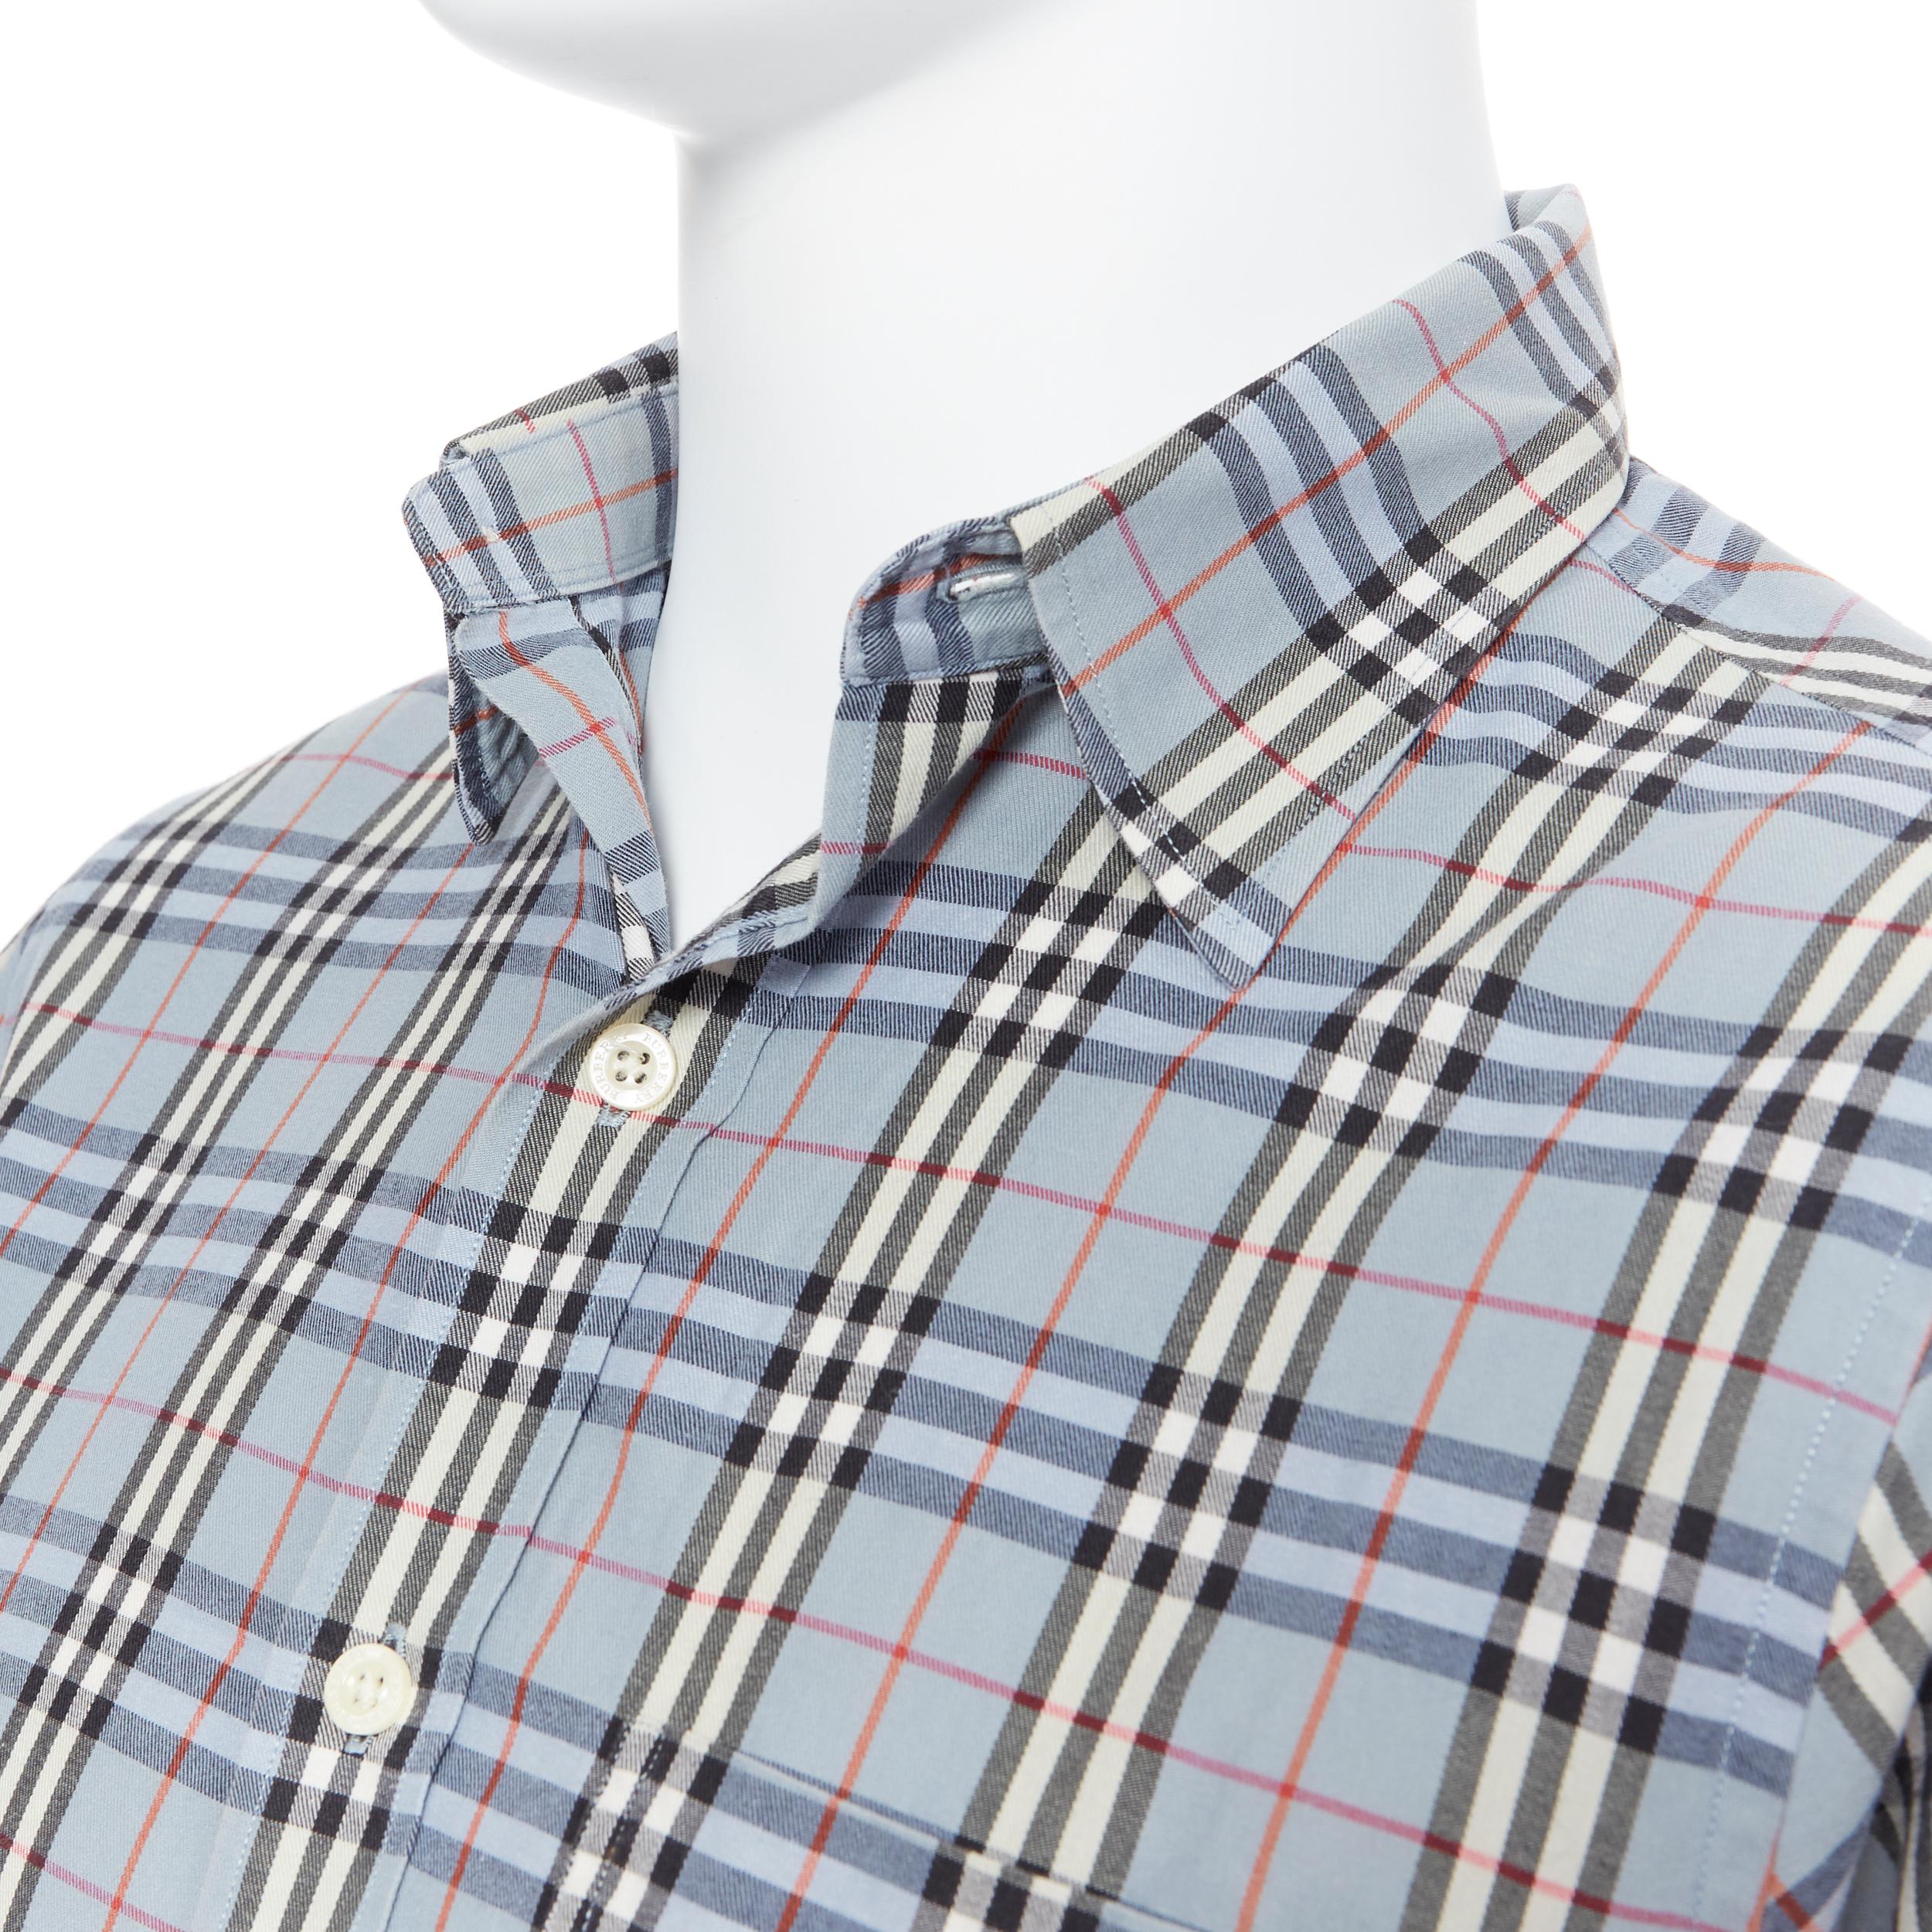 BURBERRY House Check blue checkered cotton short sleeve casual shirt S
Brand: Burberry
Model Name / Style: Cotton shirt
Material: Cotton
Color: Blue
Pattern: Check
Extra Detail: Short sleeve. Collared neckline. Spread collar.

CONDITION: 
Condition: